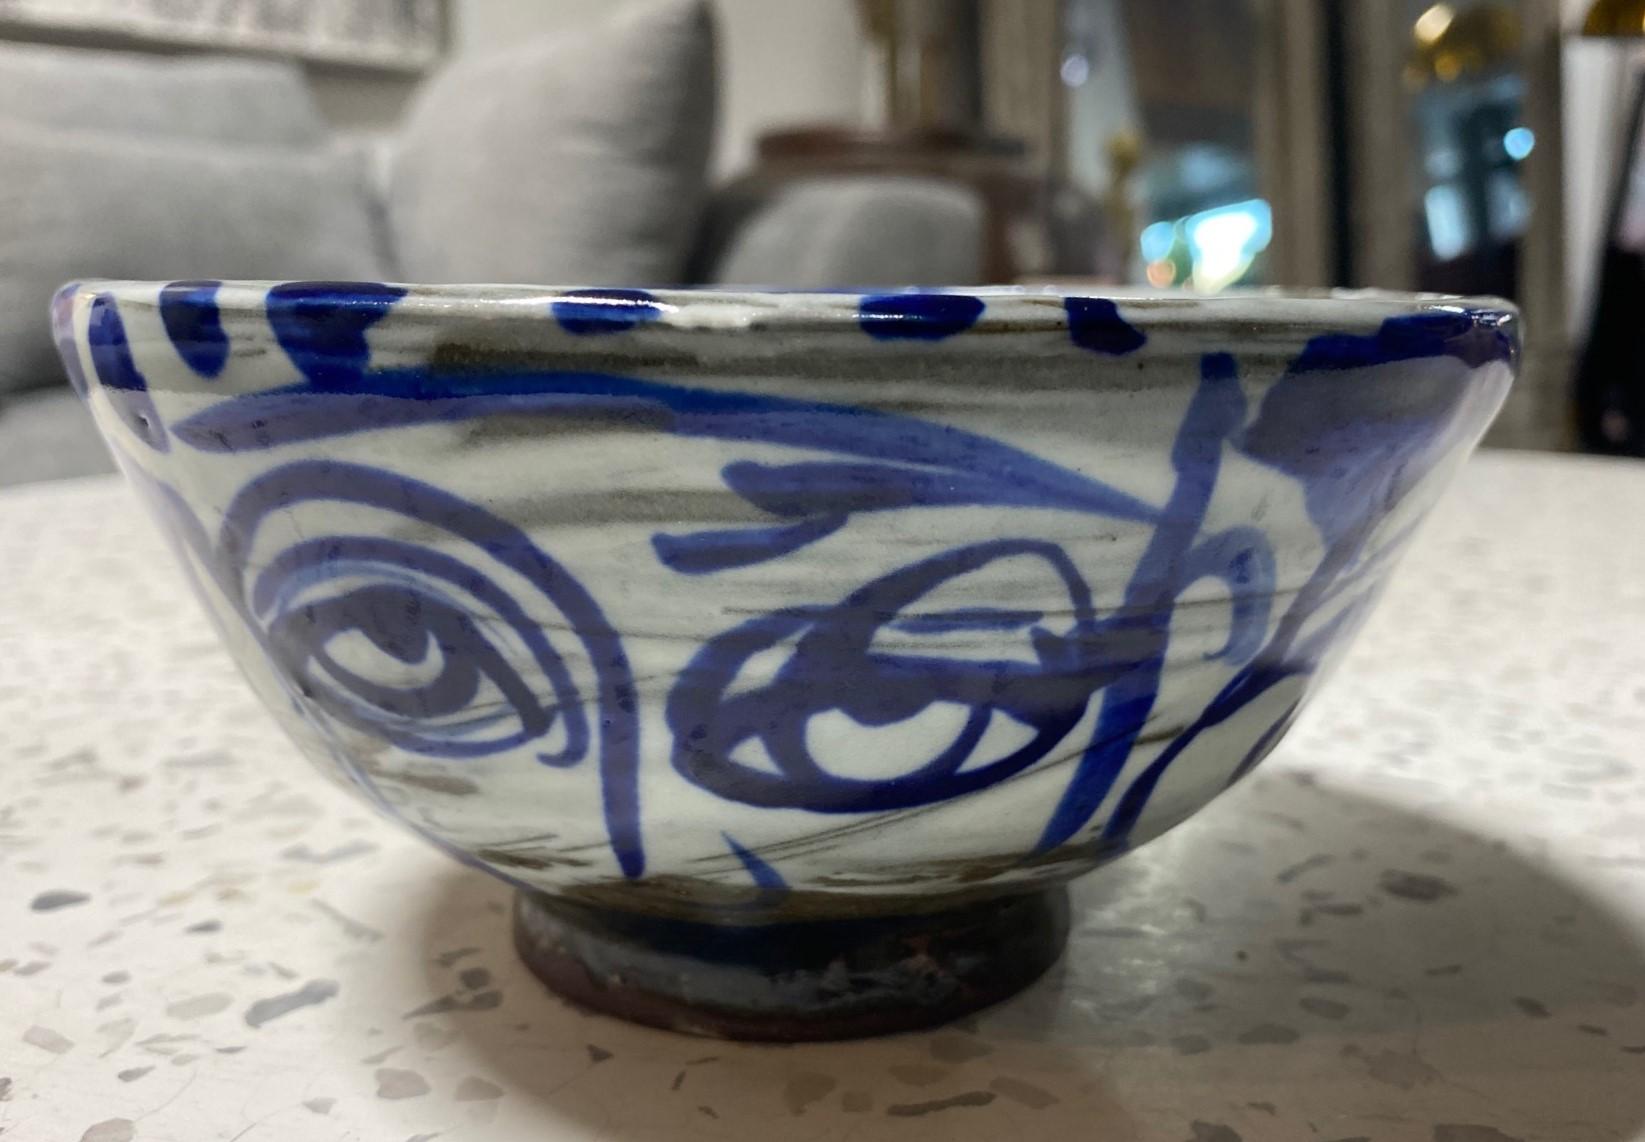 A wonderfully, hand-painted, one-of-a-kind studio pottery bowl by Korean-American master potter/artist Sunkoo (Sun Koo) Yuh. Yuh's work is often inspired by Buddhist and Confucian beliefs incorporated with socio-political messages. 

Yuh was born